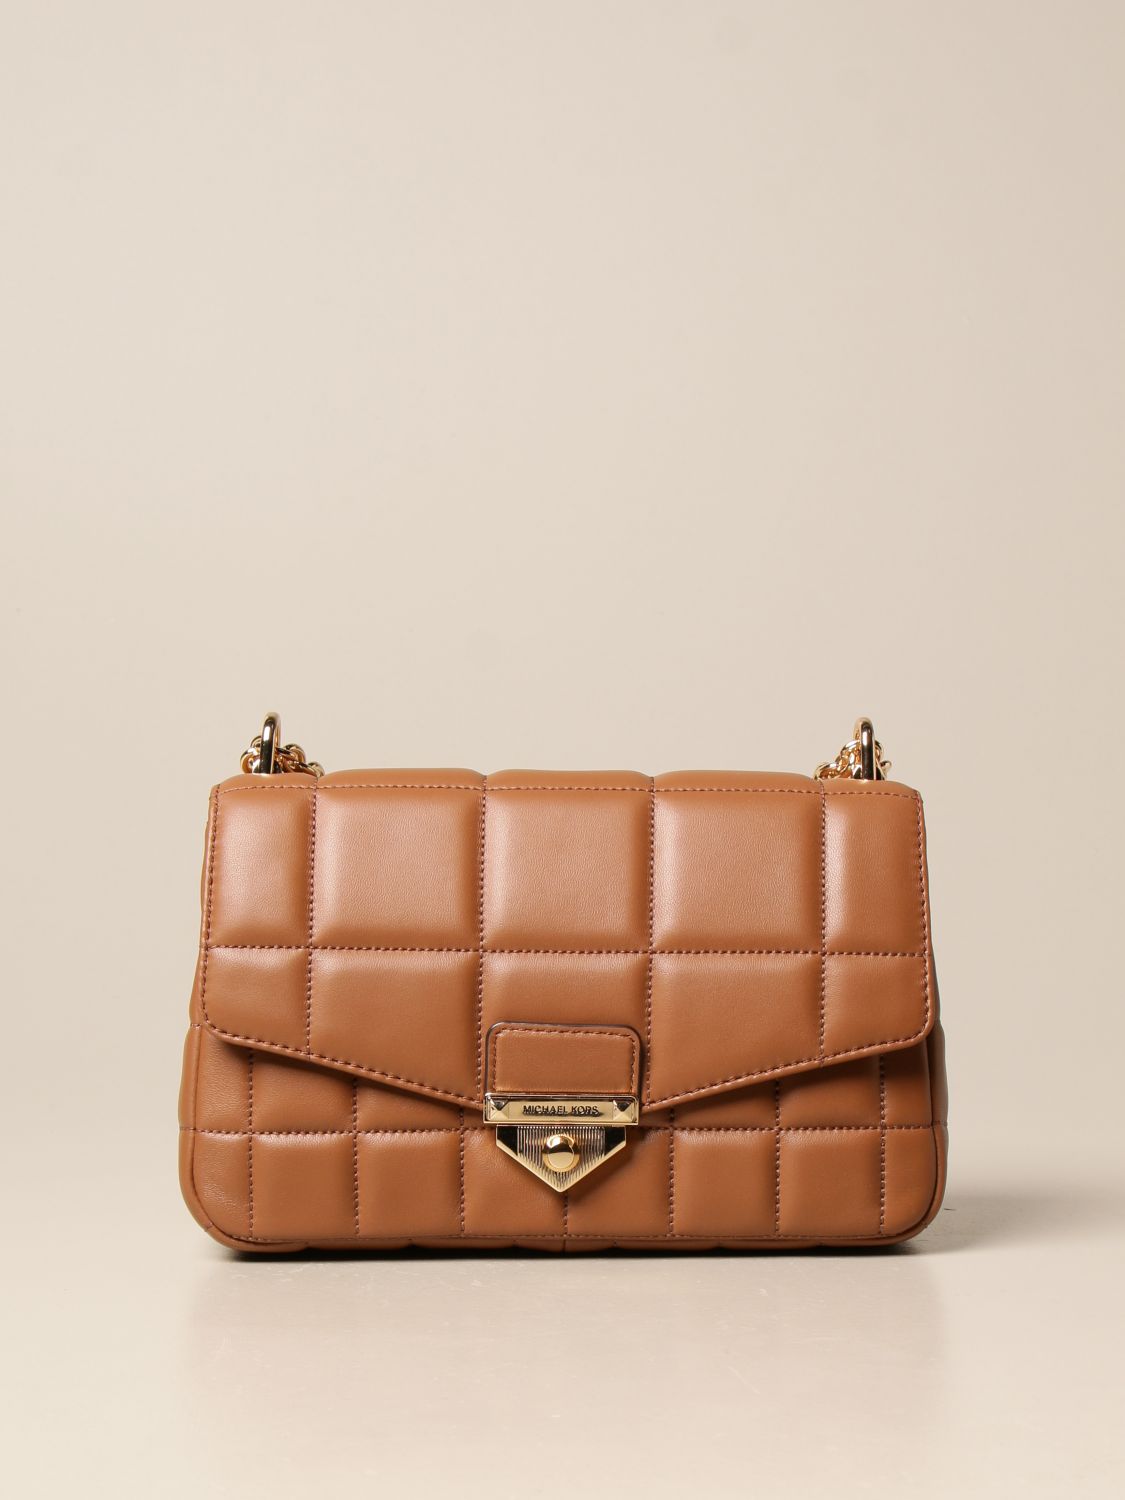 MICHAEL KORS: Soho Michael bag in quilted leather - Brown | Michael ...